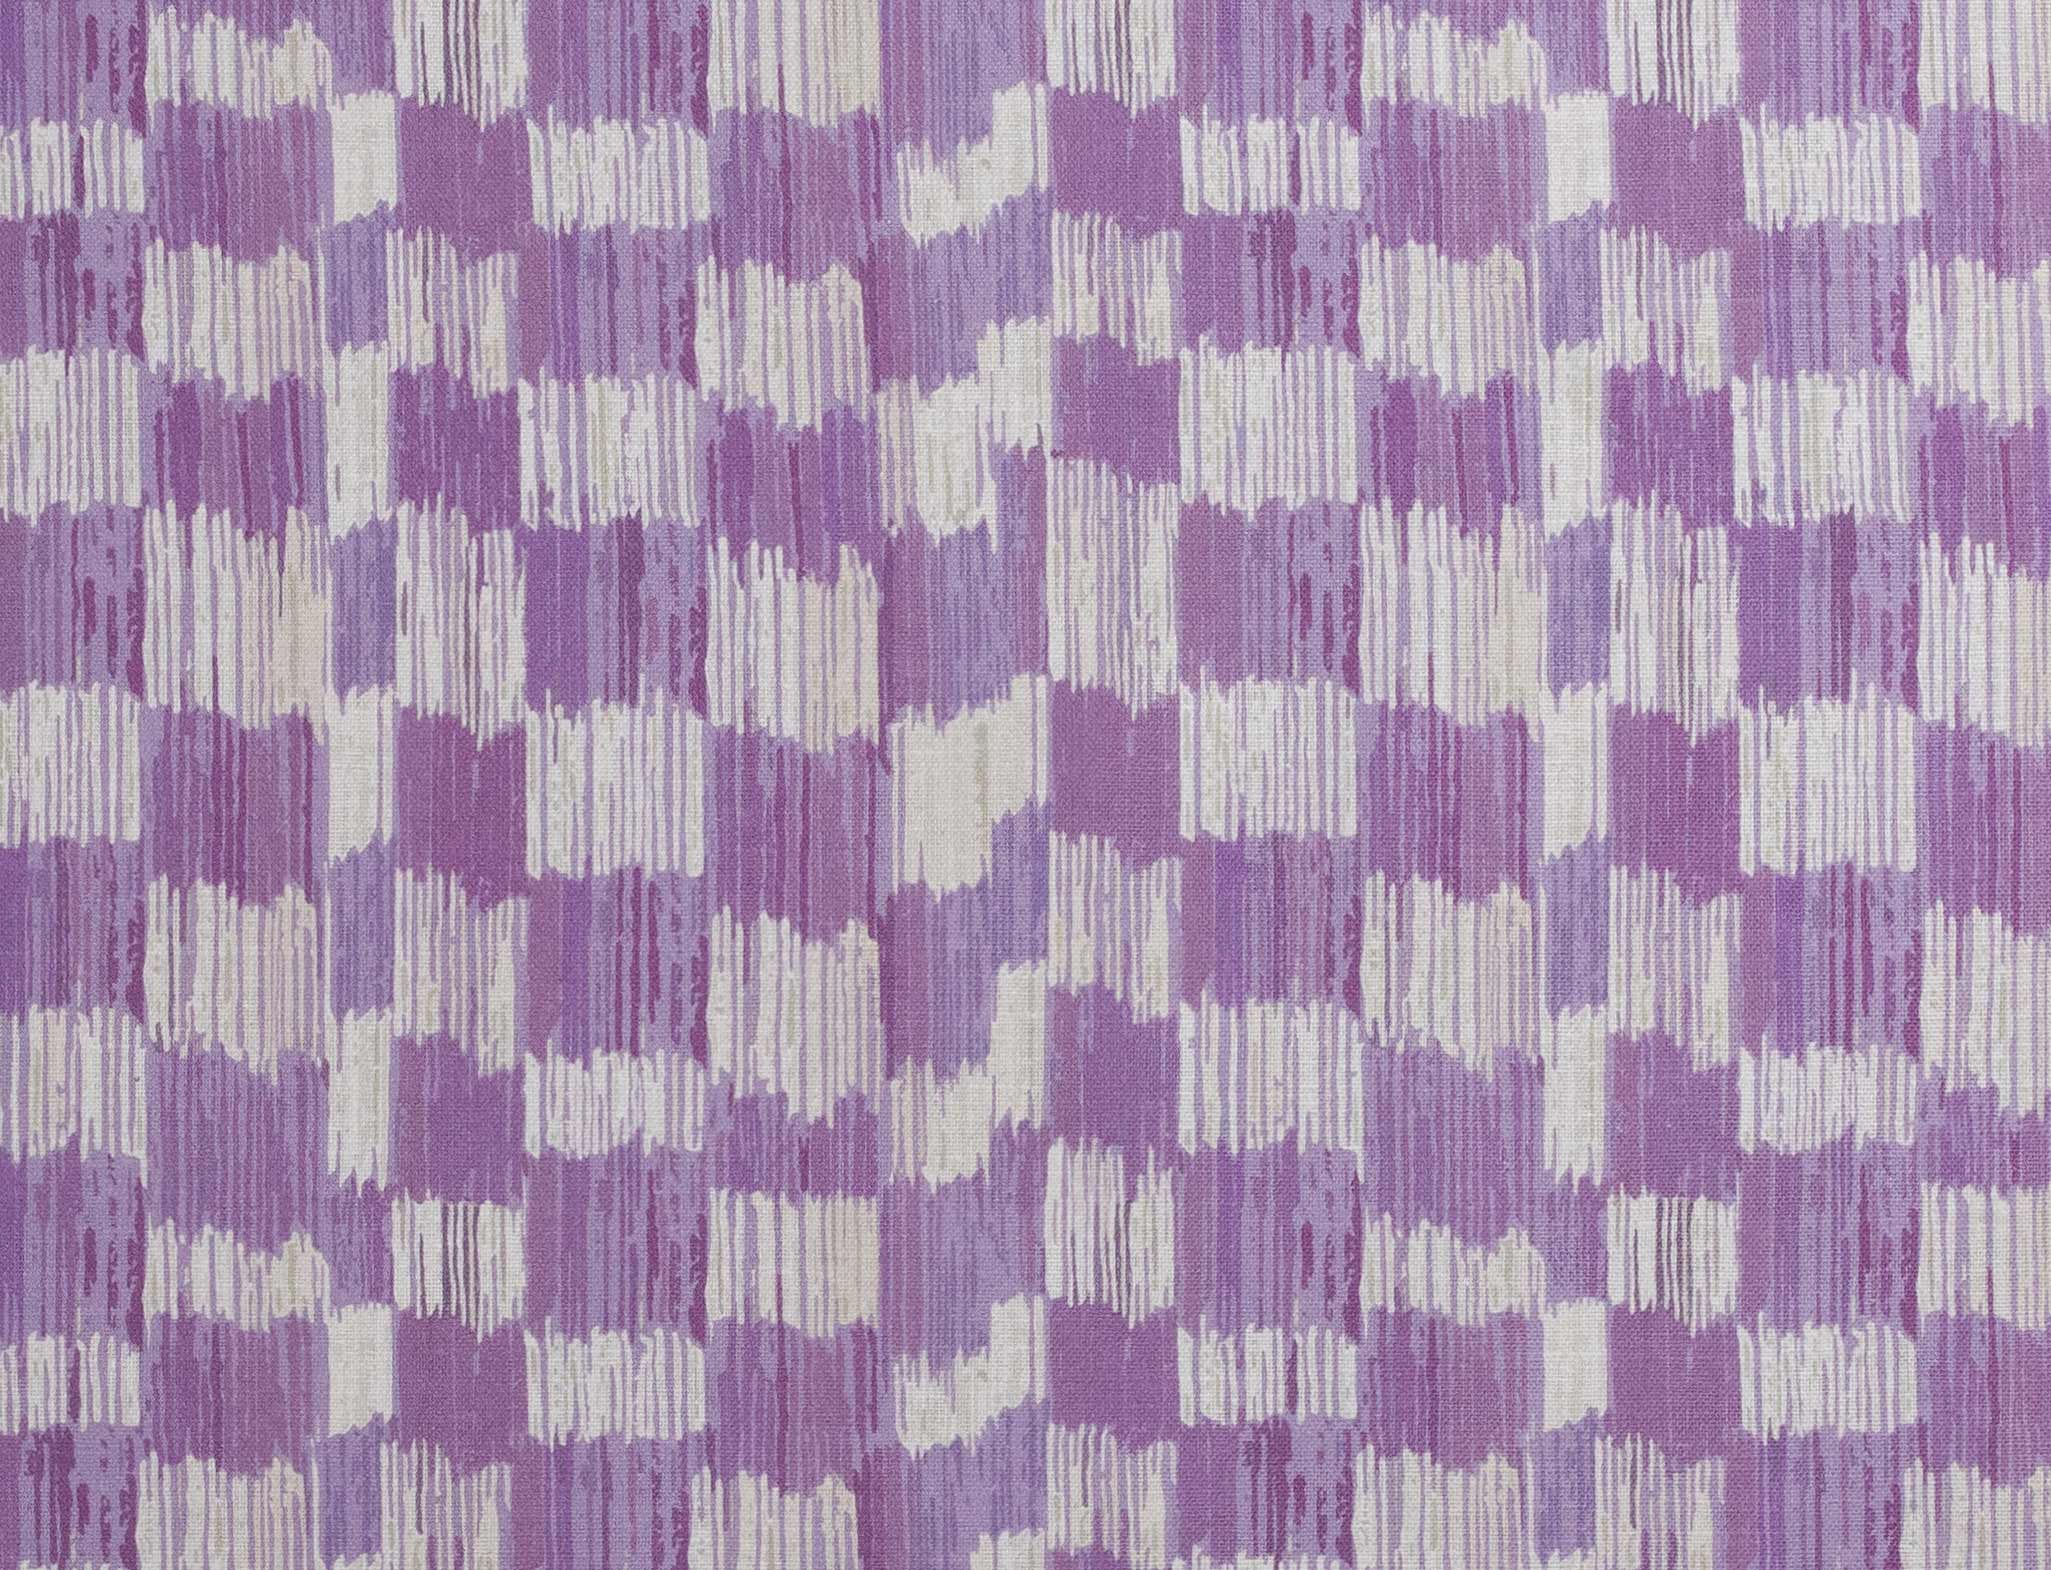 Detail of fabric in an abstract check print in shades of purple and cream.